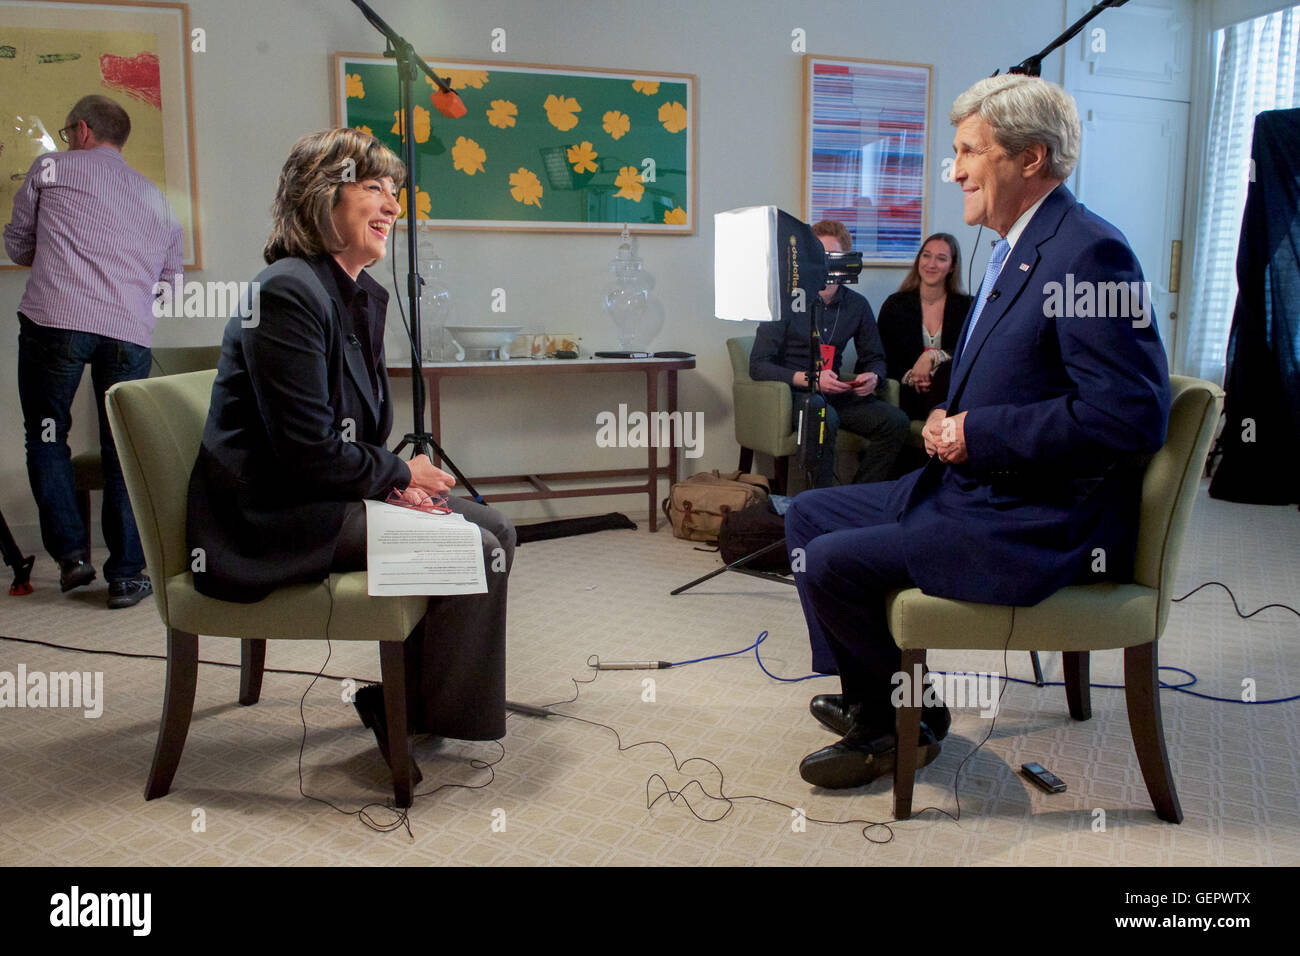 Secretary Kerry Shares a Laugh With CNN's Chief International Correspondent Amanpour Before an Interview at the U.S. Embassy in London Stock Photo